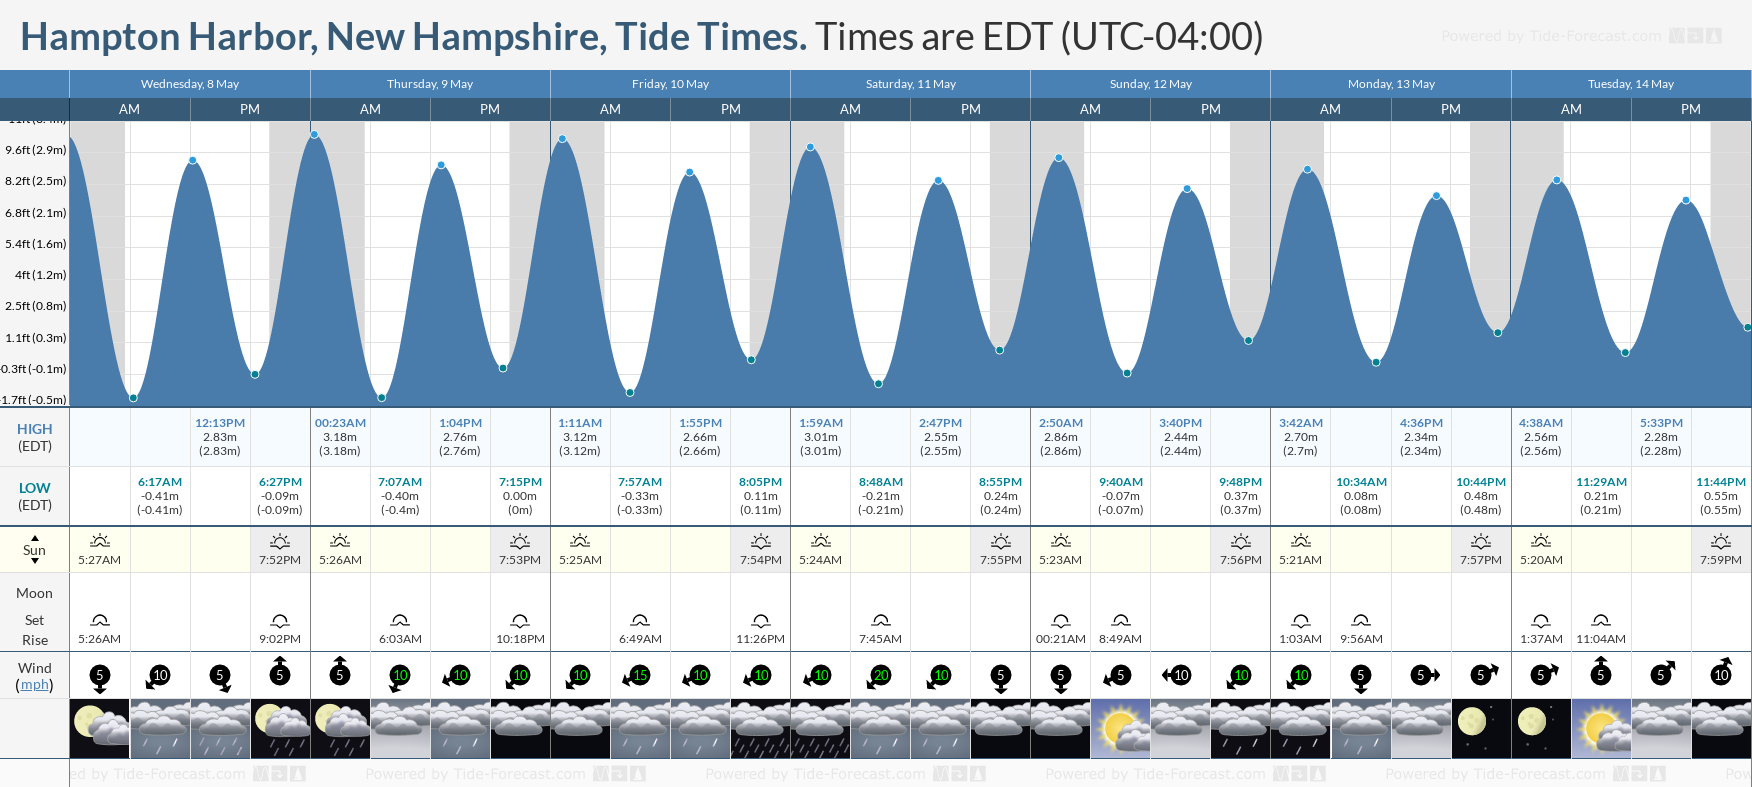 Hampton Harbor, New Hampshire Tide Chart including high and low tide tide times for the next 7 days